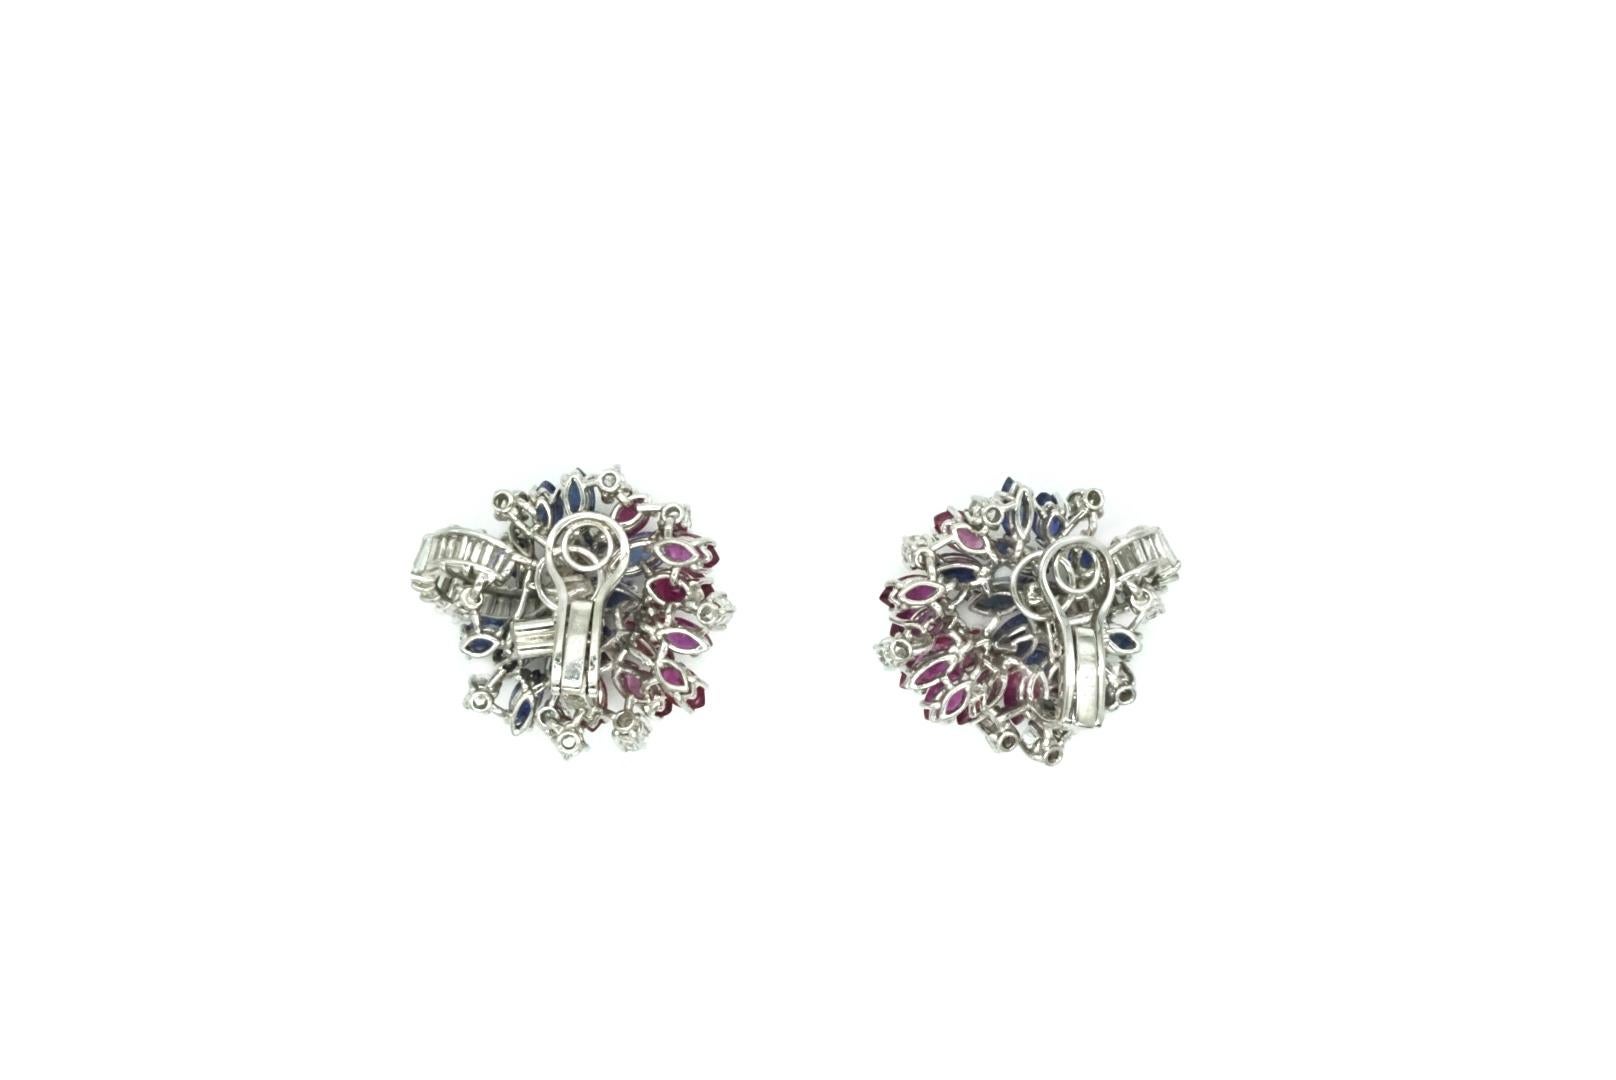 Brilliant Cut White Gold Earclips with Diamonds, Sapphires and Rubies For Sale